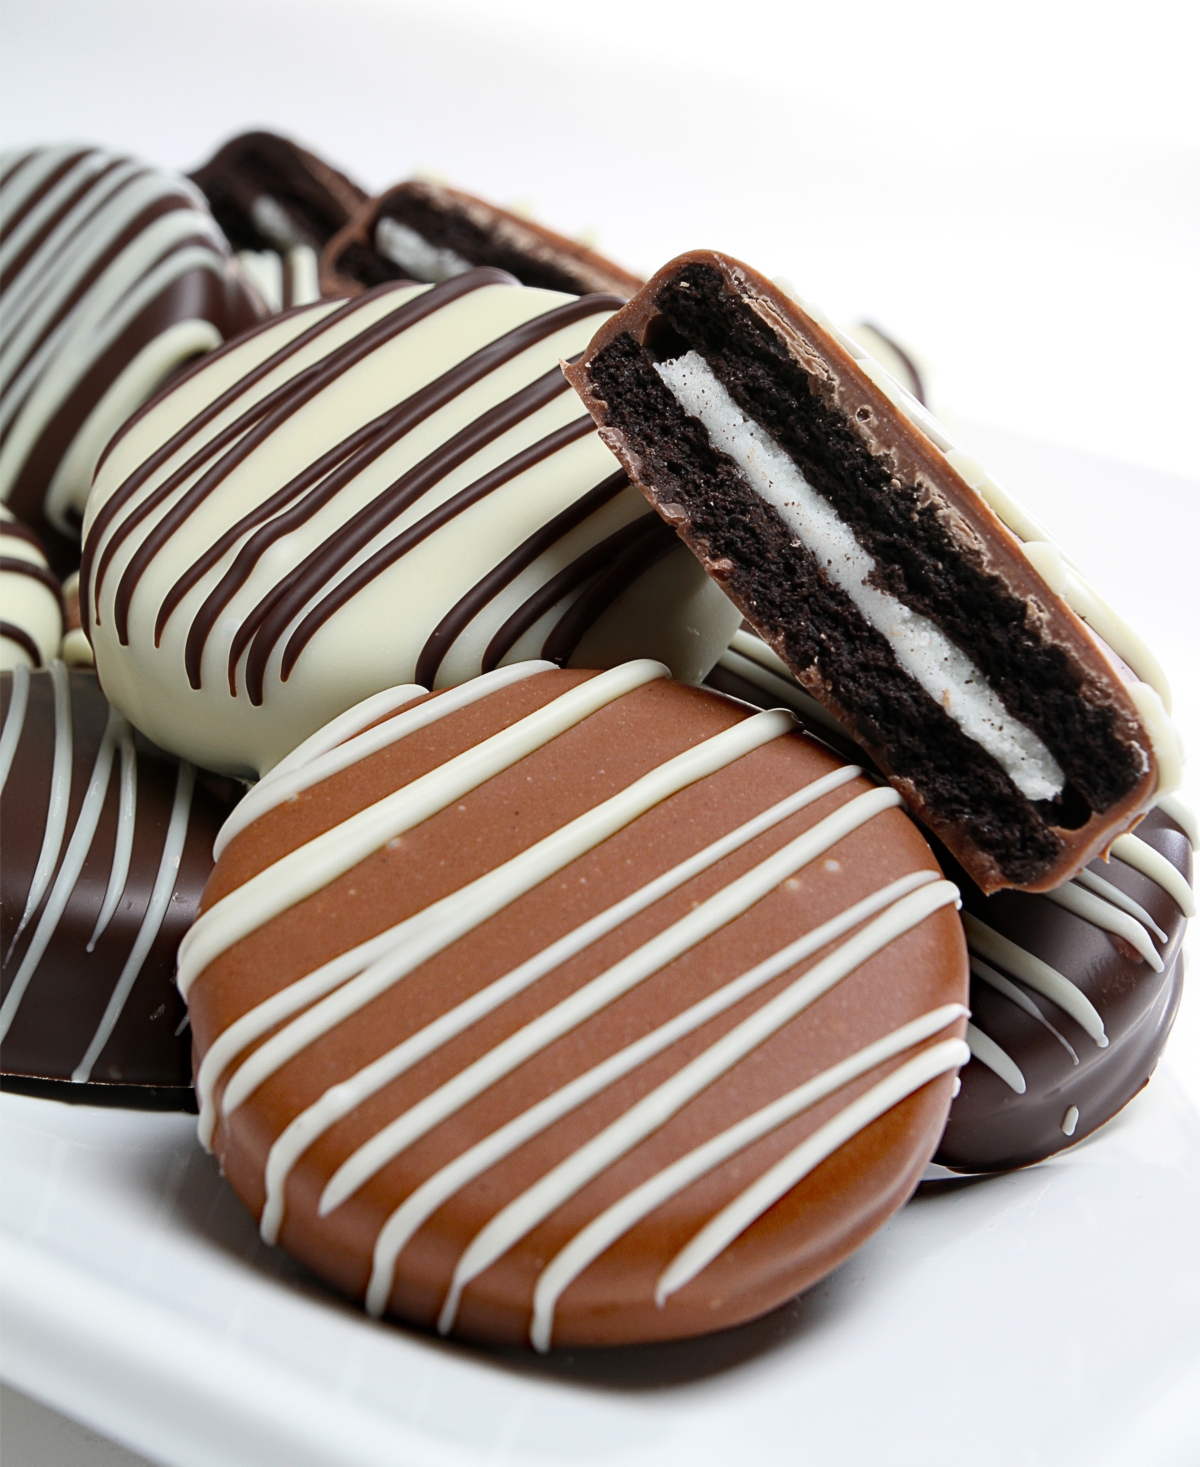 Shop Chocolate Covered Company Classic Belgian Chocolate Covered Oreo Cookies In No Color